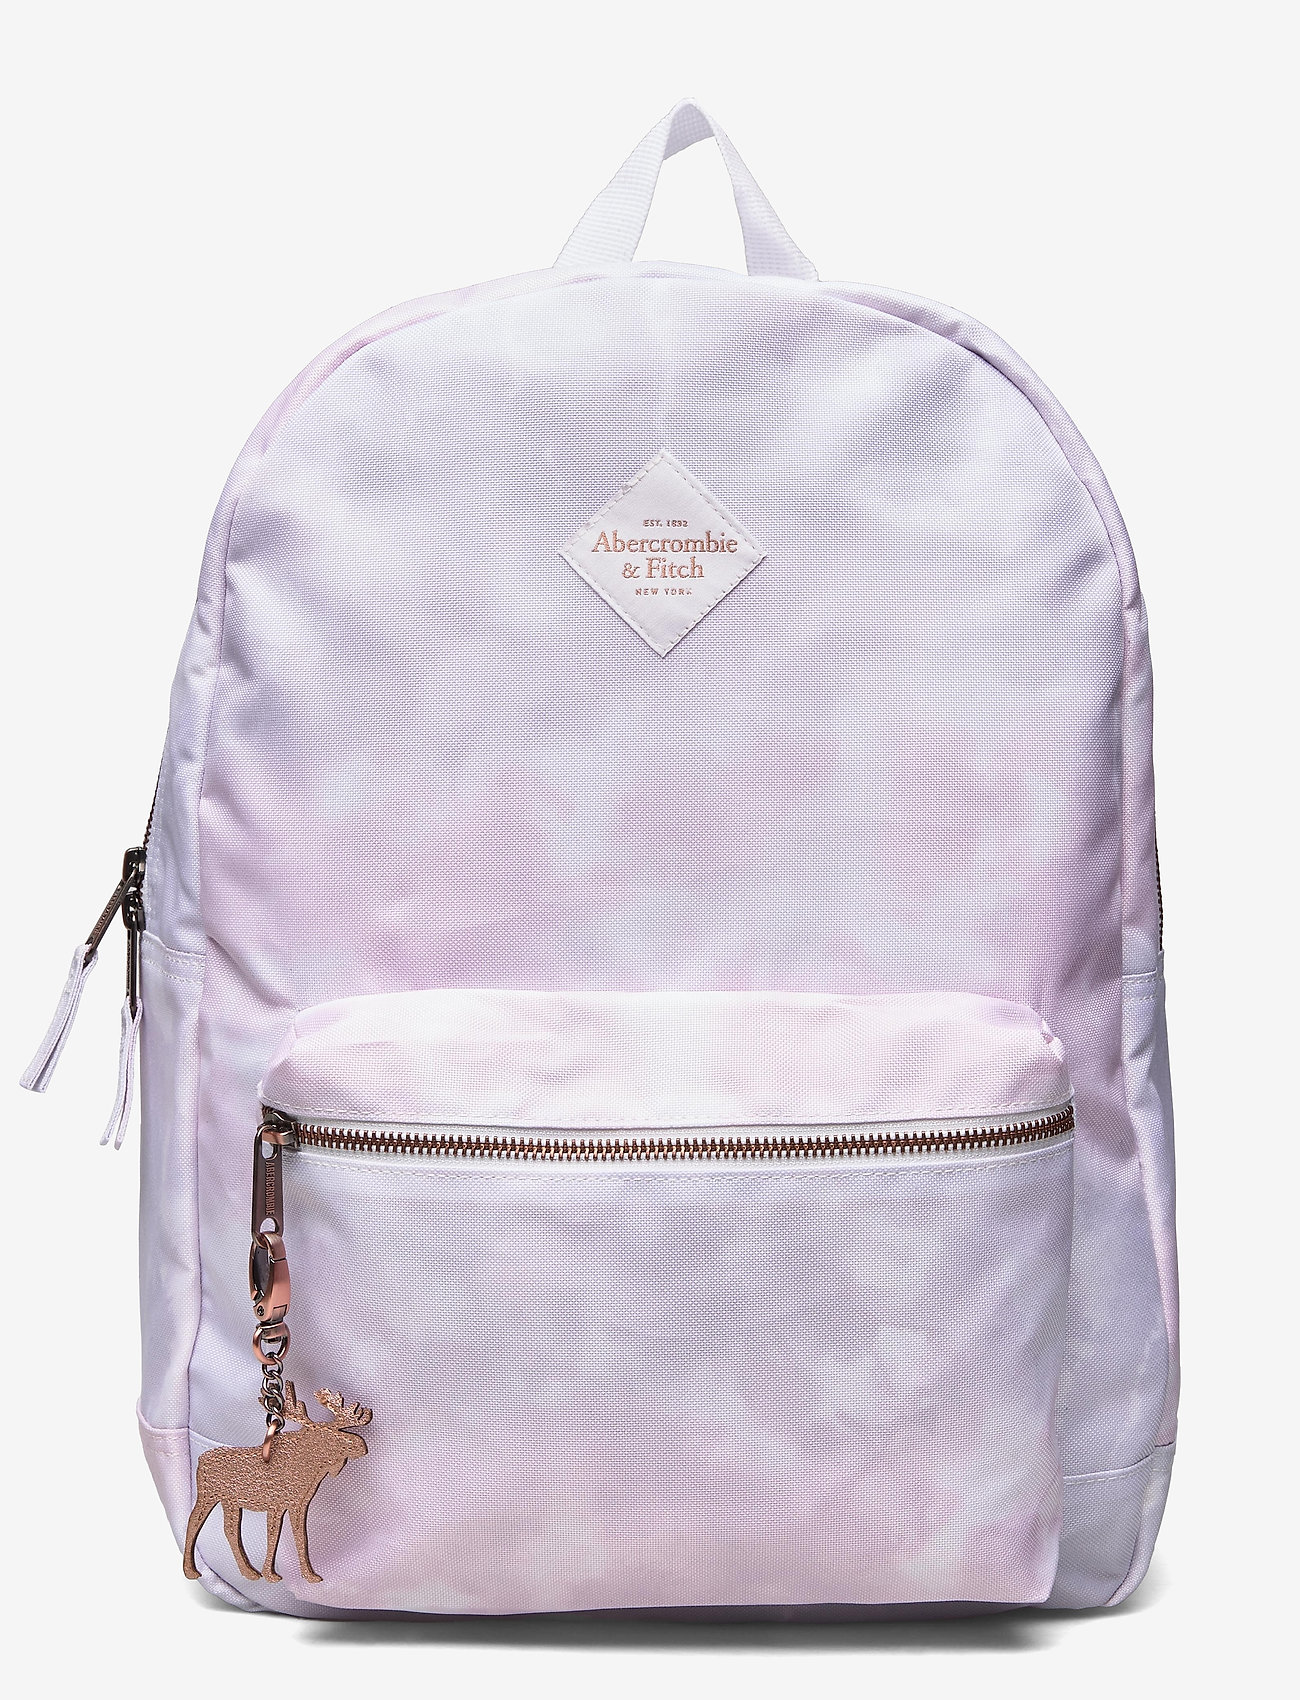 abercrombie and fitch backpack